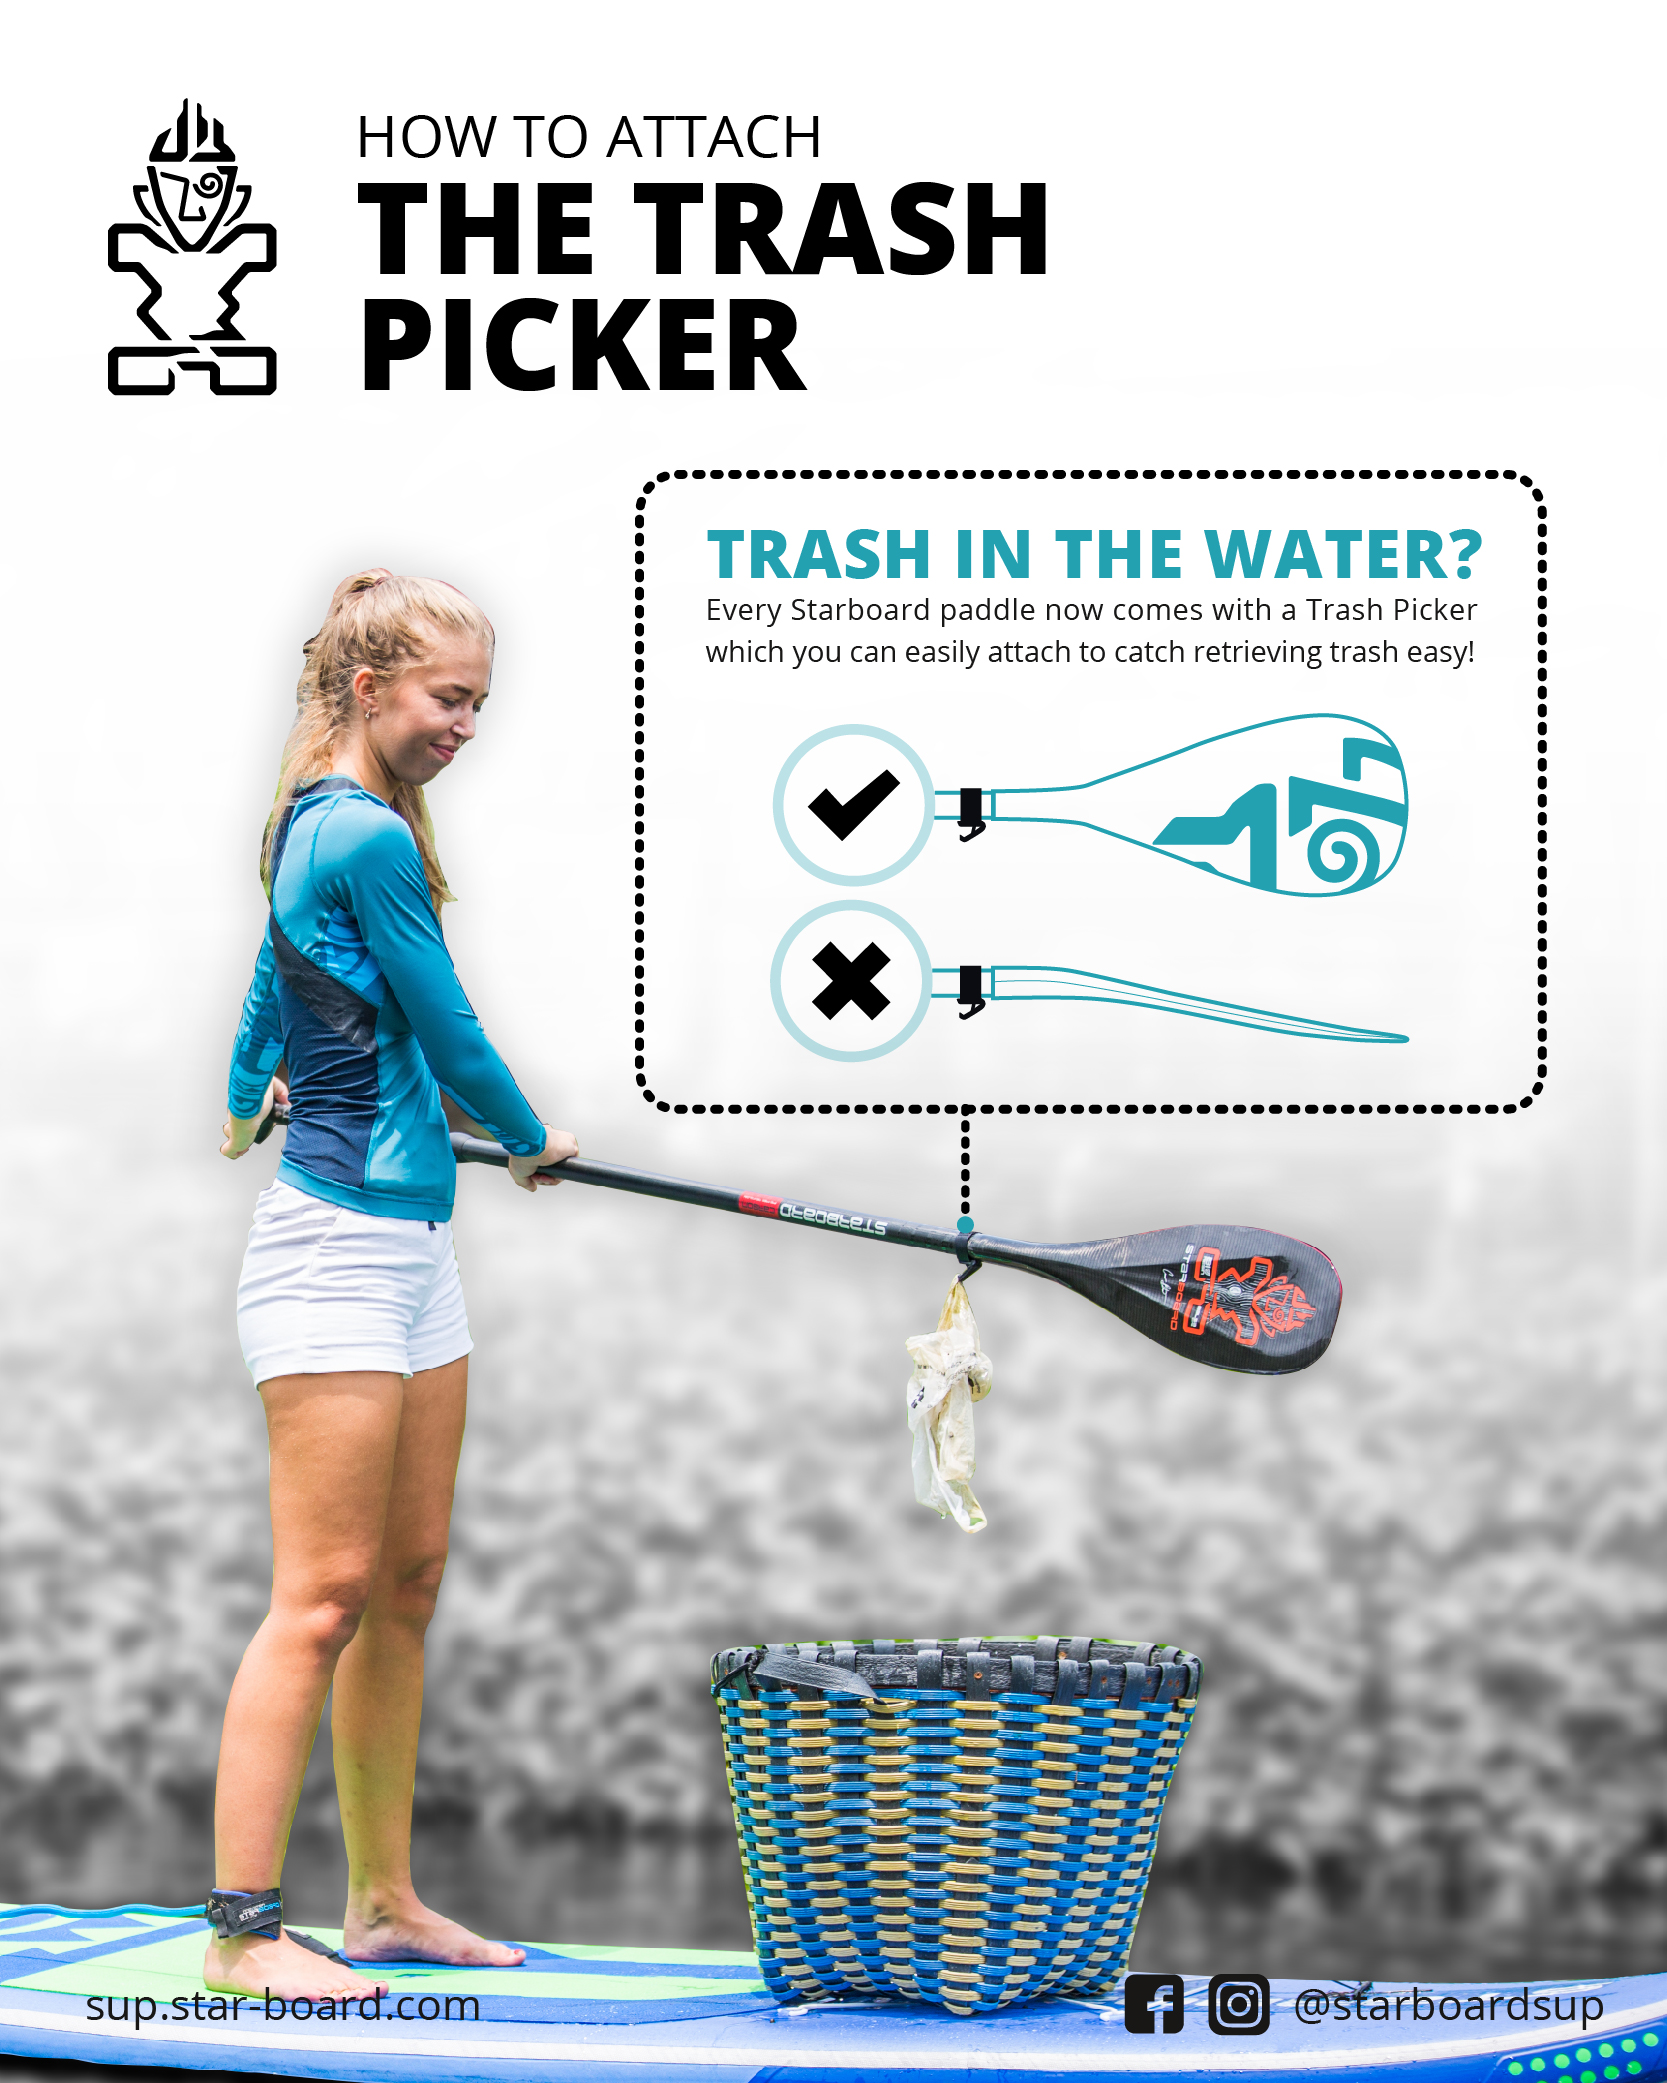 Starboard-SUP-Stand-Up-Paddle-boarding-How-to-attach-trash-picker